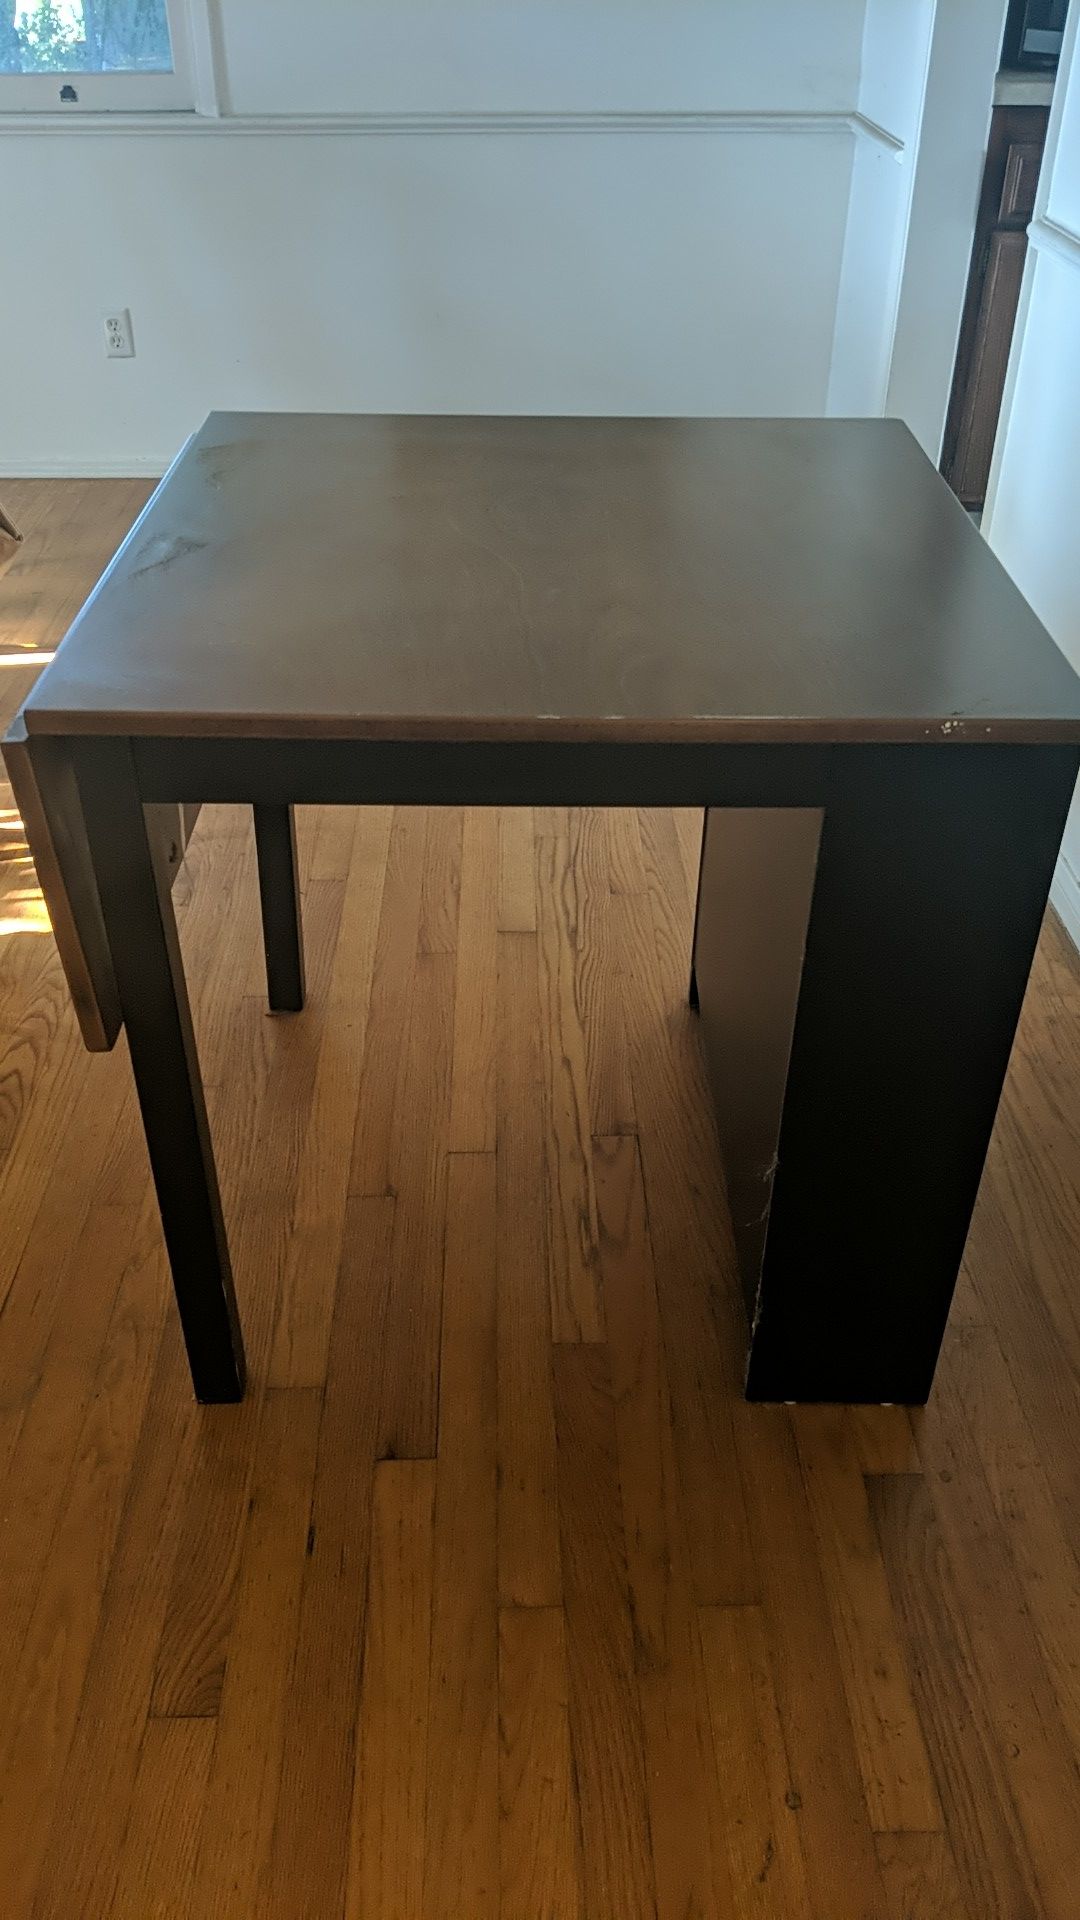 Table with 2 chairs